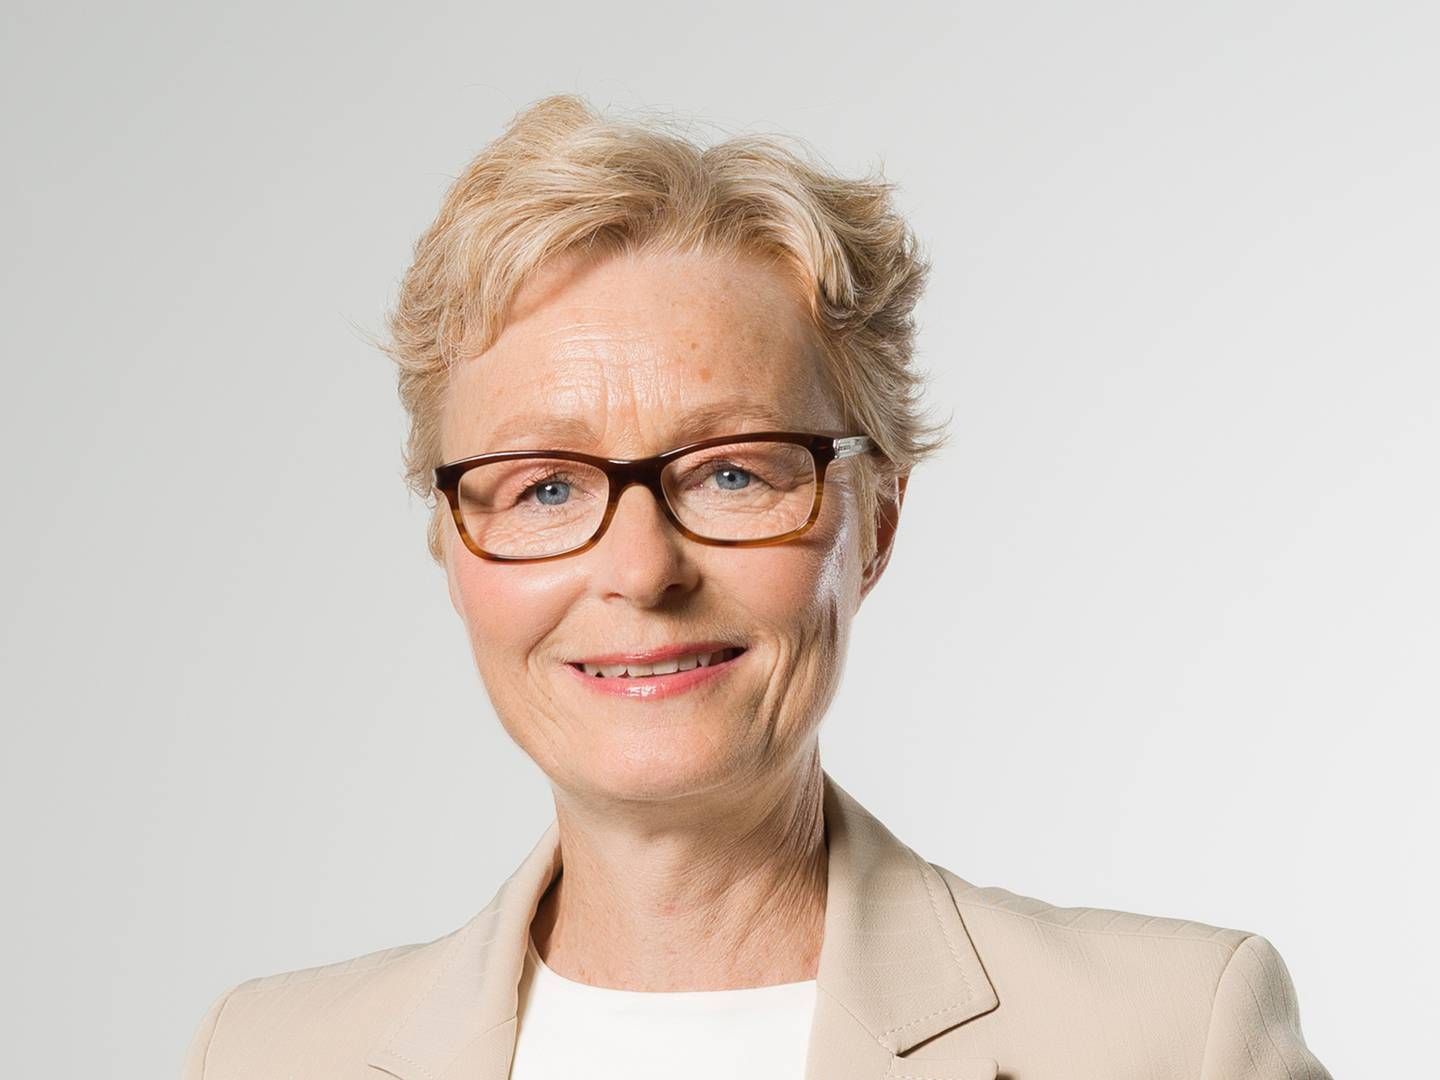 According to Inger Söderbom, cost efficiency is of great importance to the Swedish Pensions Agency. | Photo: Pensionsmyndigheten/pr